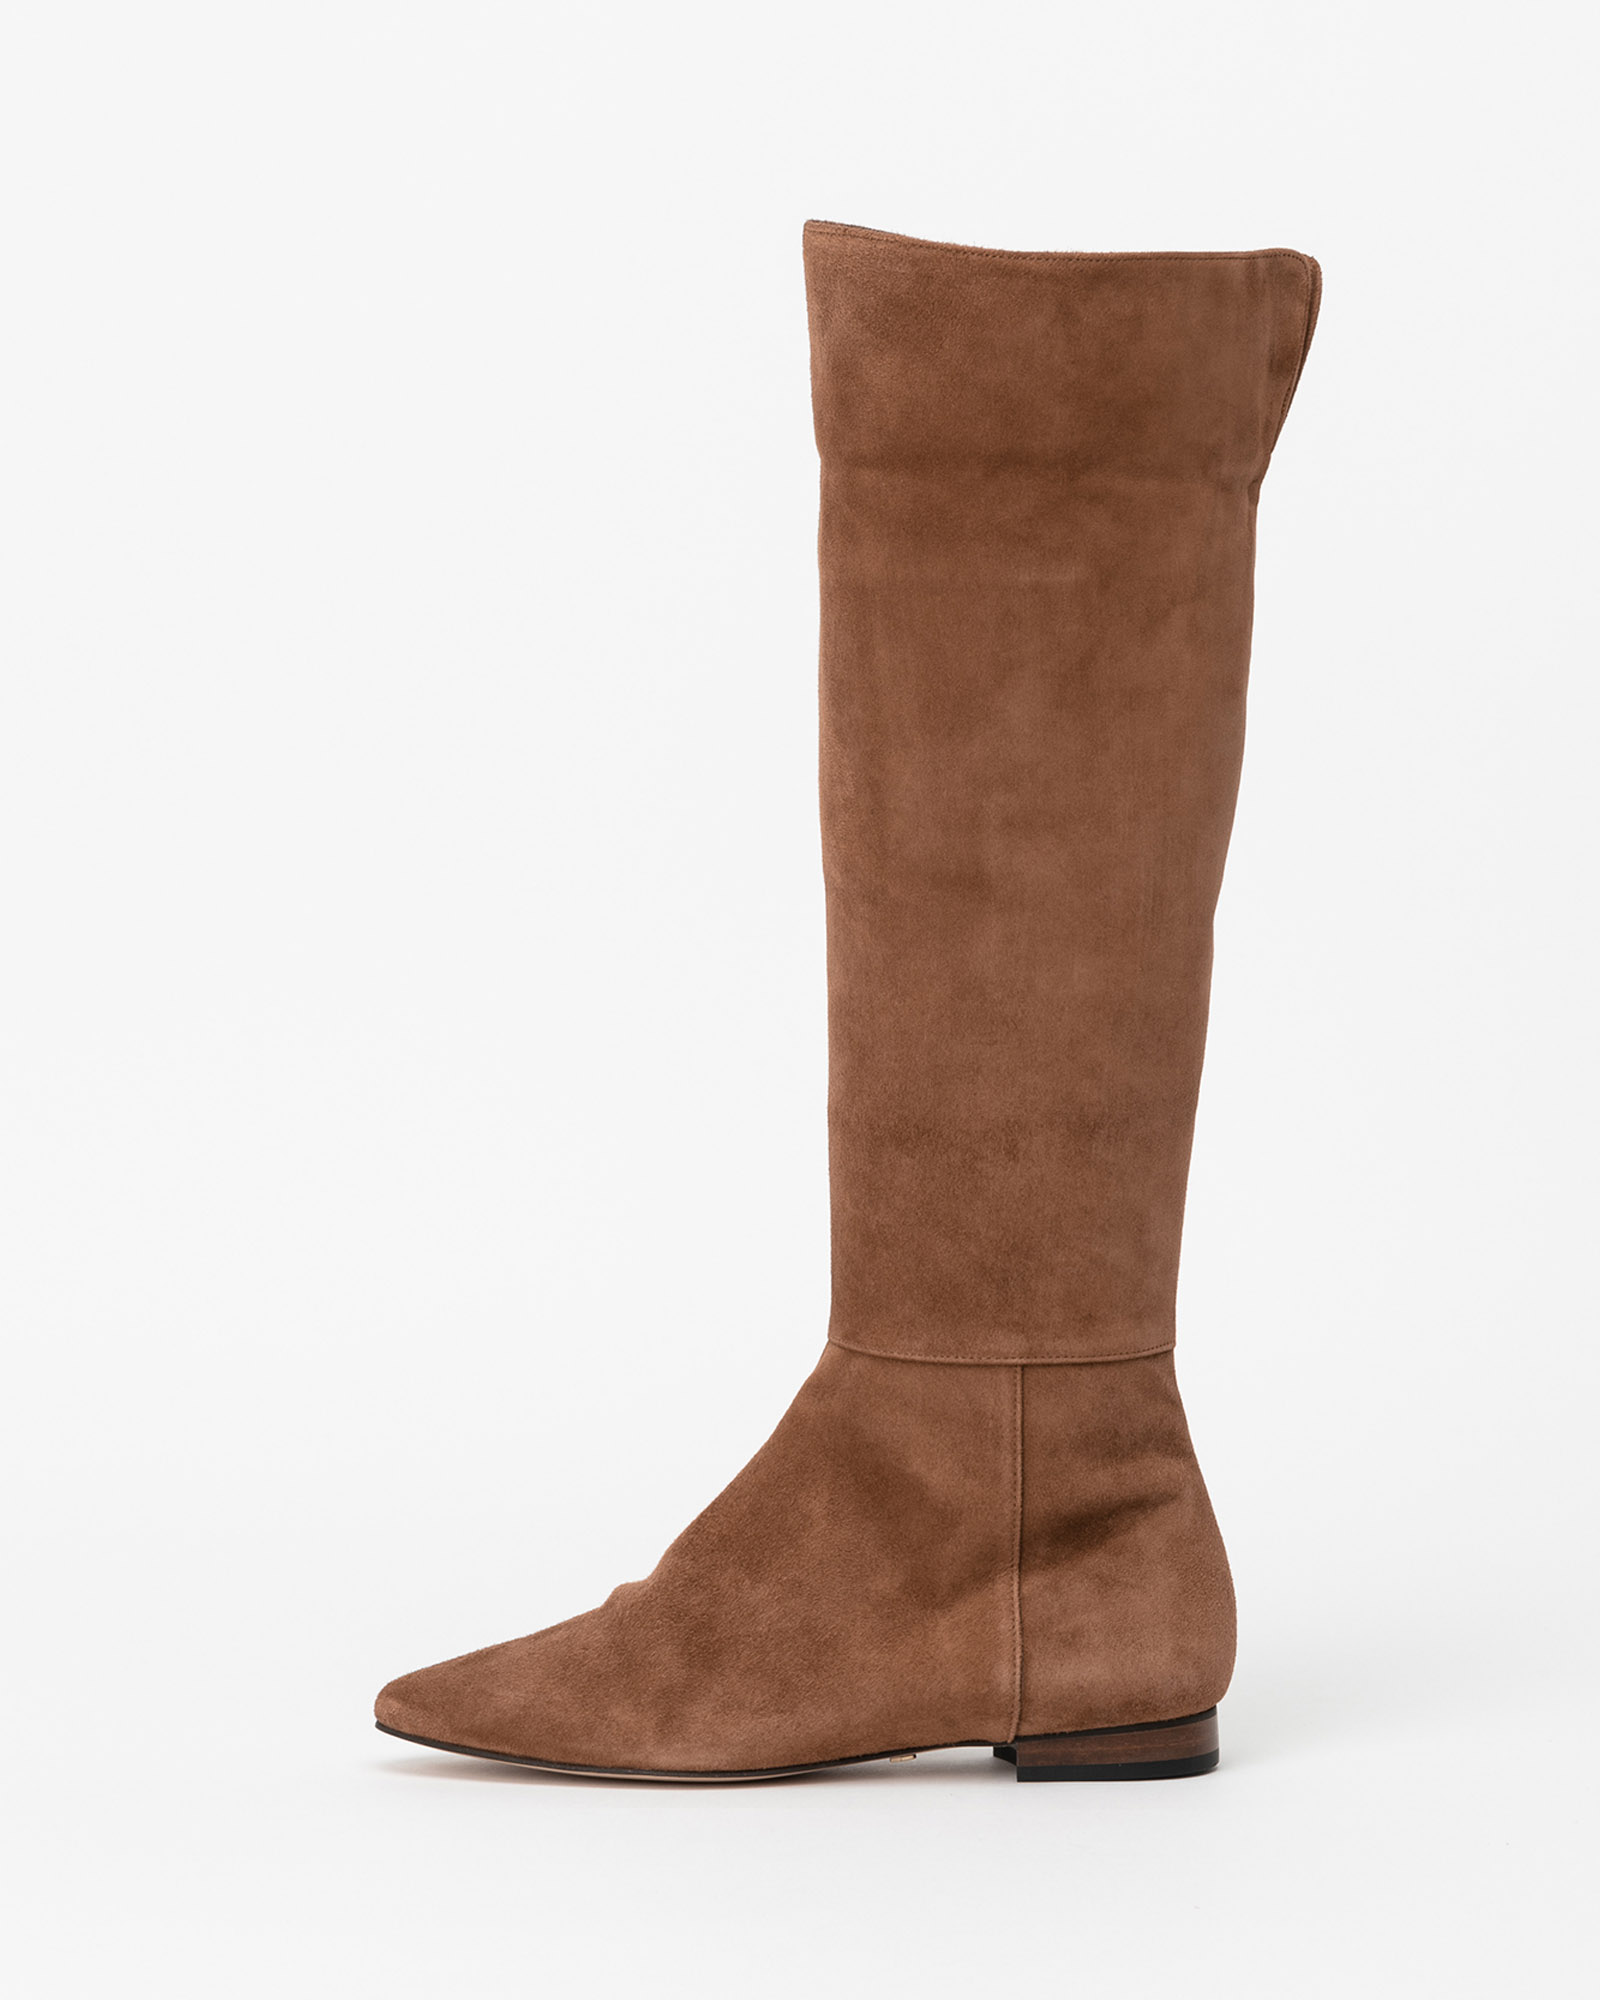 Hivero Over the Knee Boots in Mocha Brown Suede